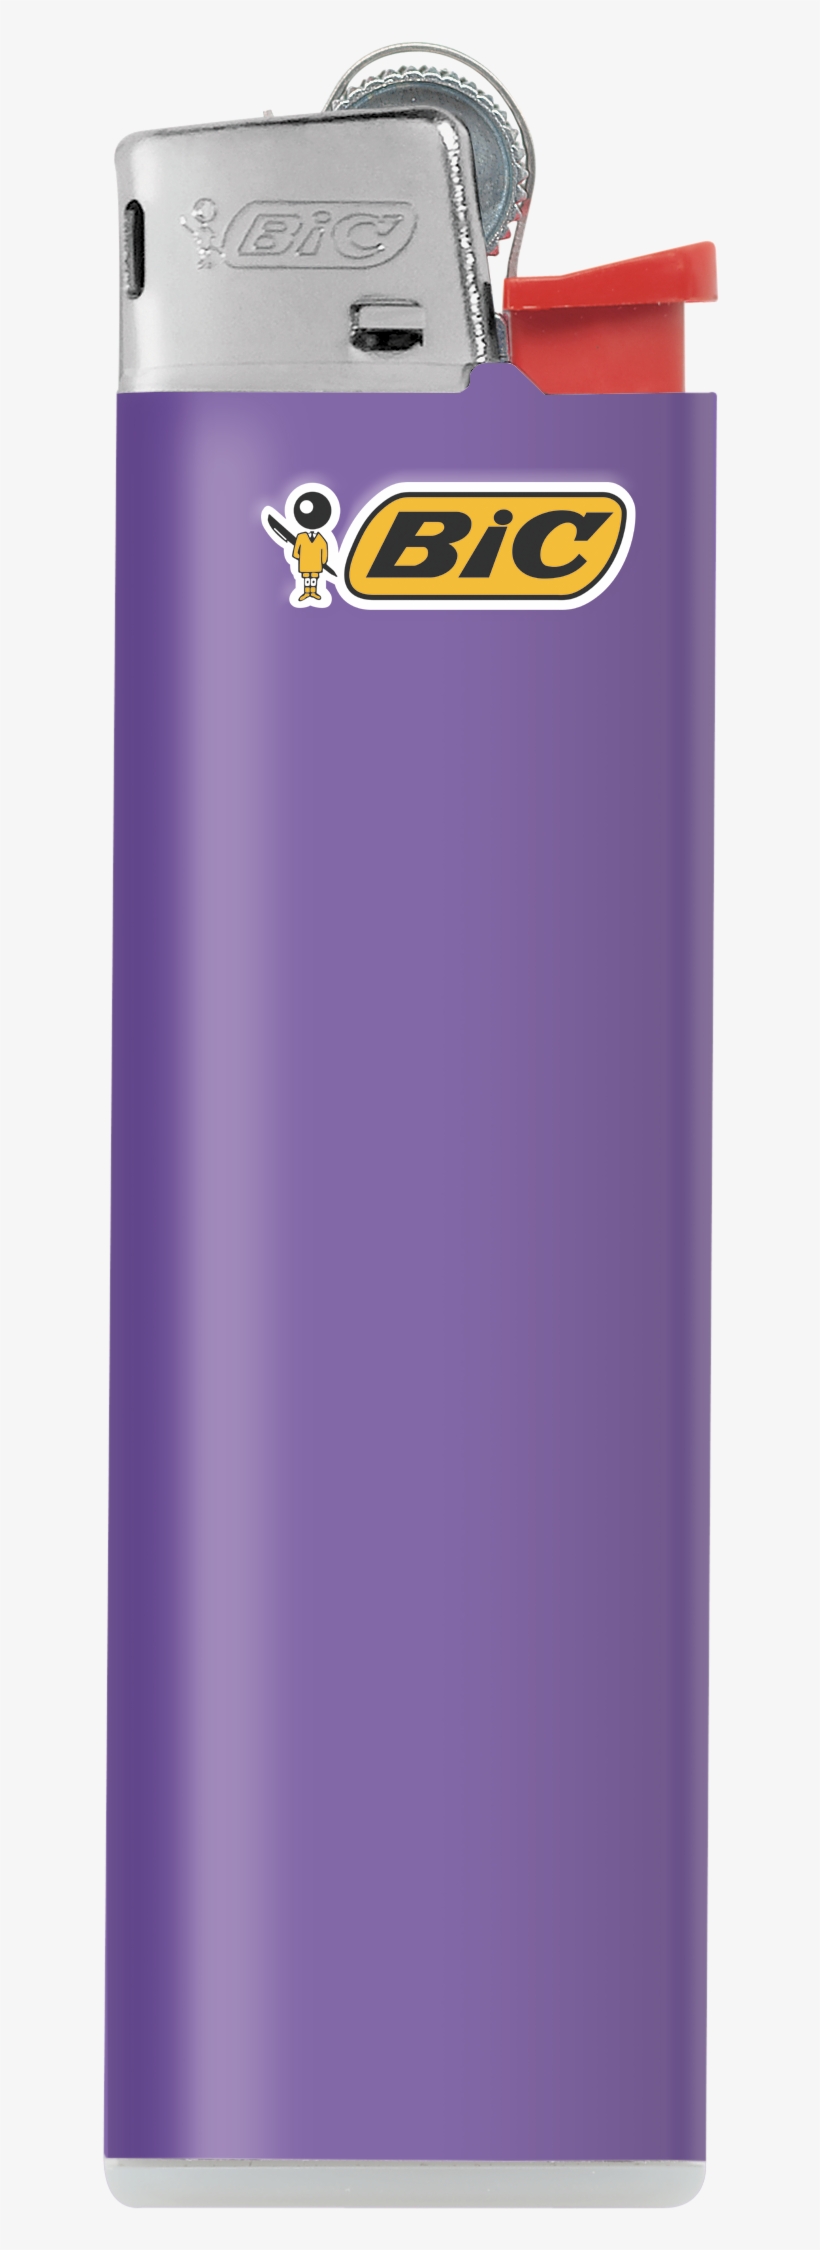 Bic J23 Slim Lighter Ignites Up To A Maximum Of Approximately - Bic, transparent png #9003084